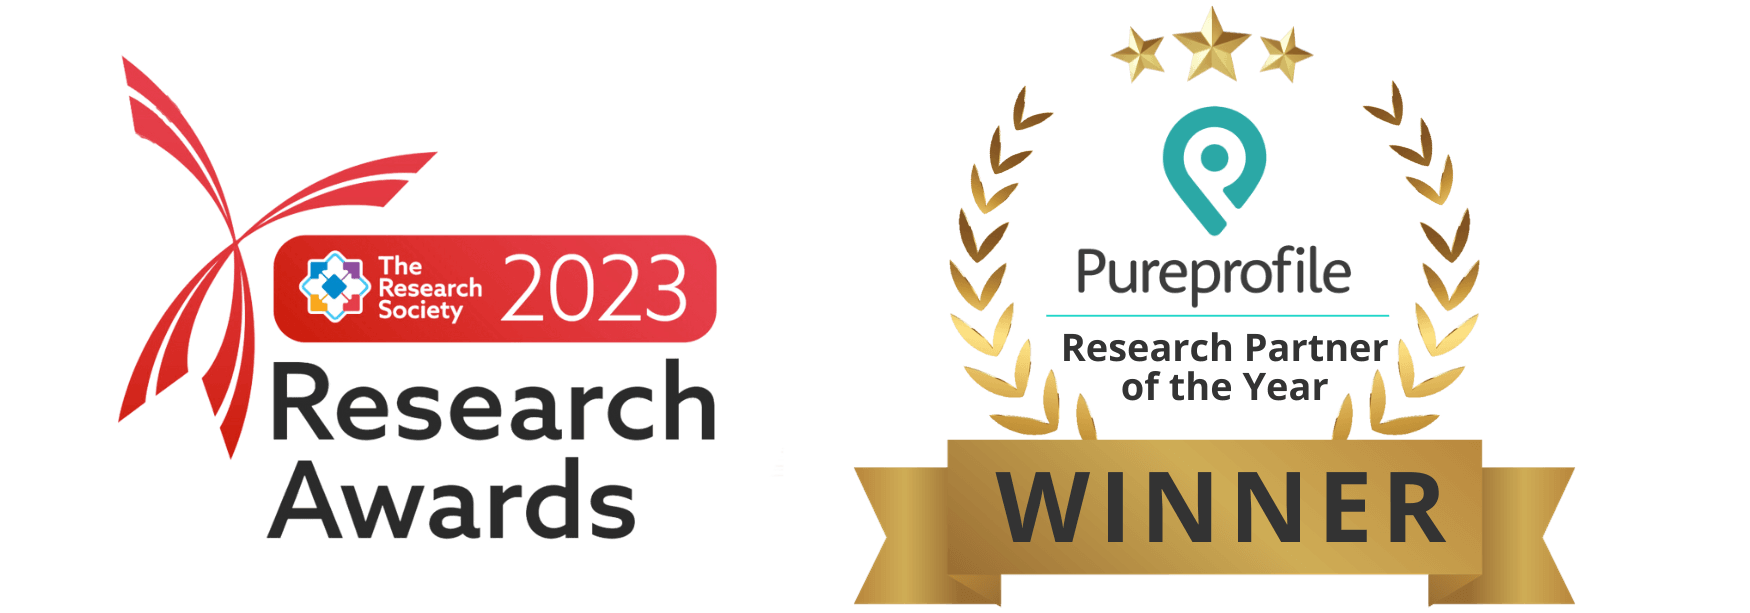 Pureprofile Research partner of the year awards